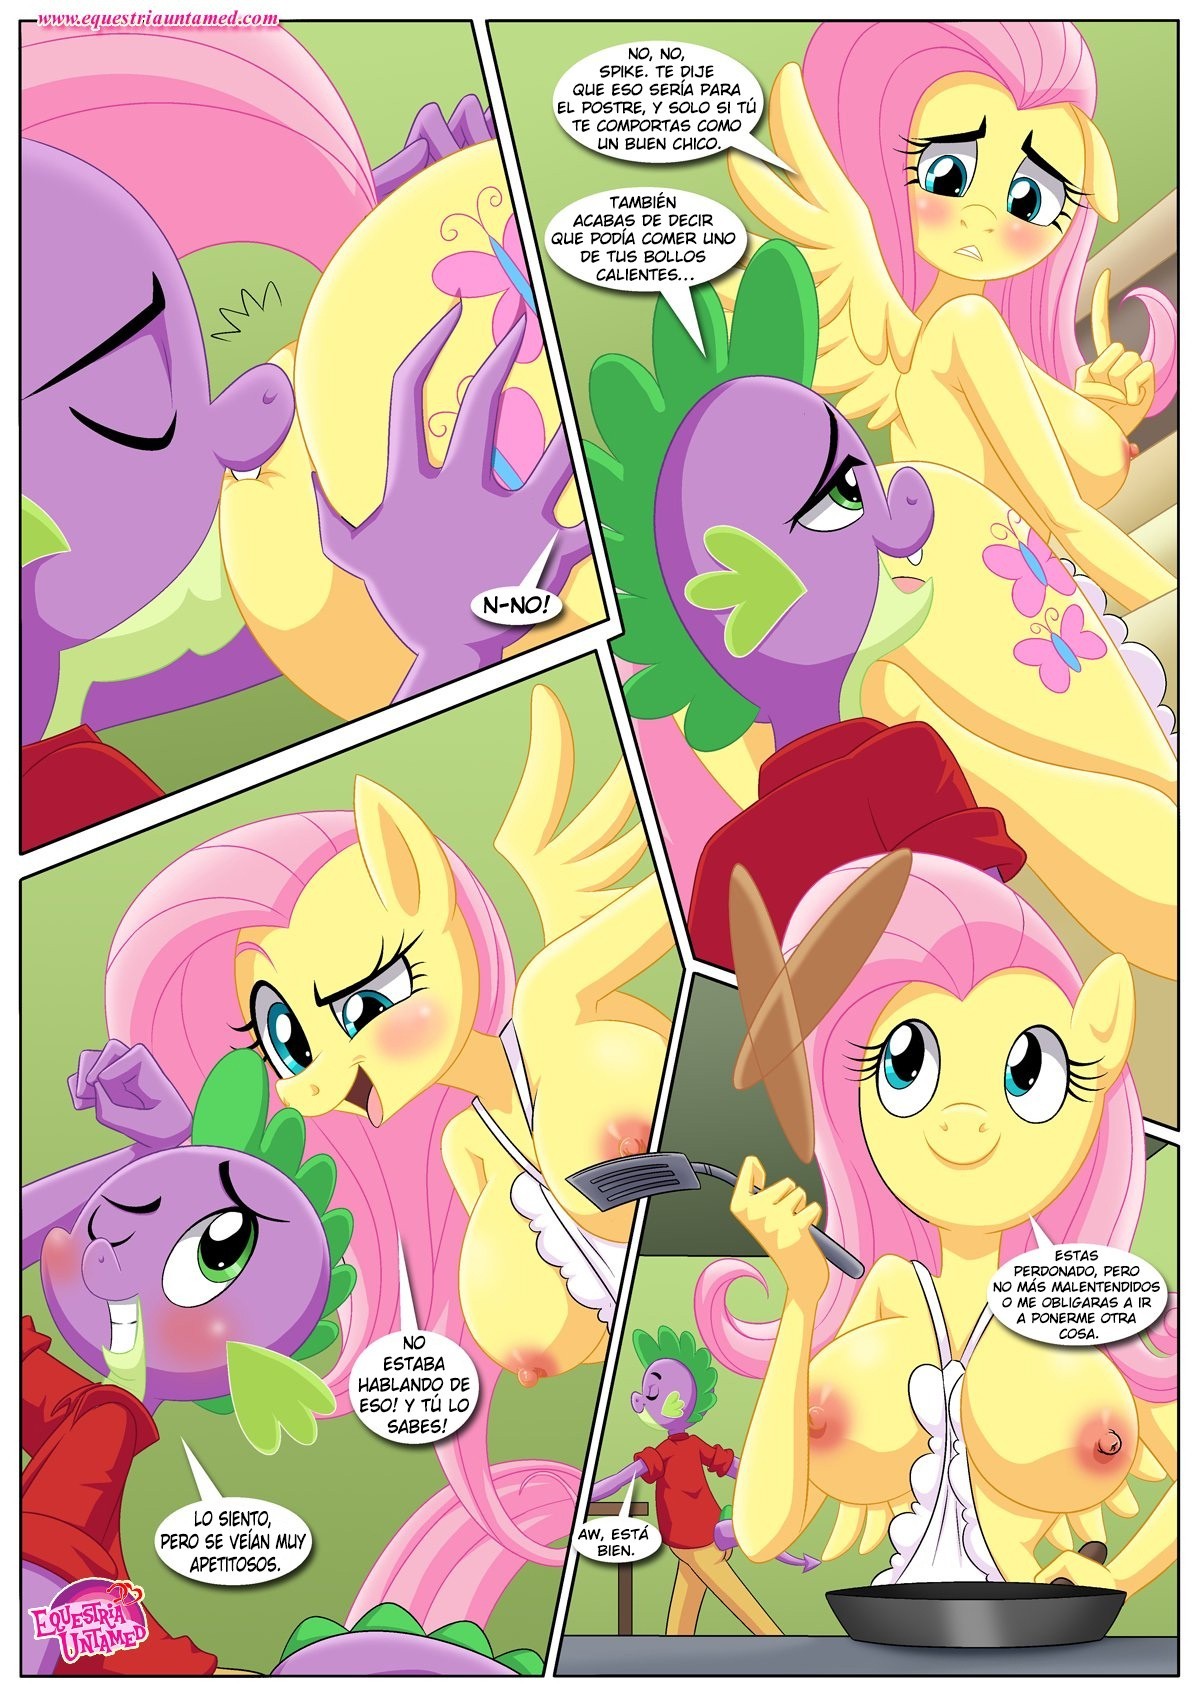 Showing images for fluttershy comic xxx